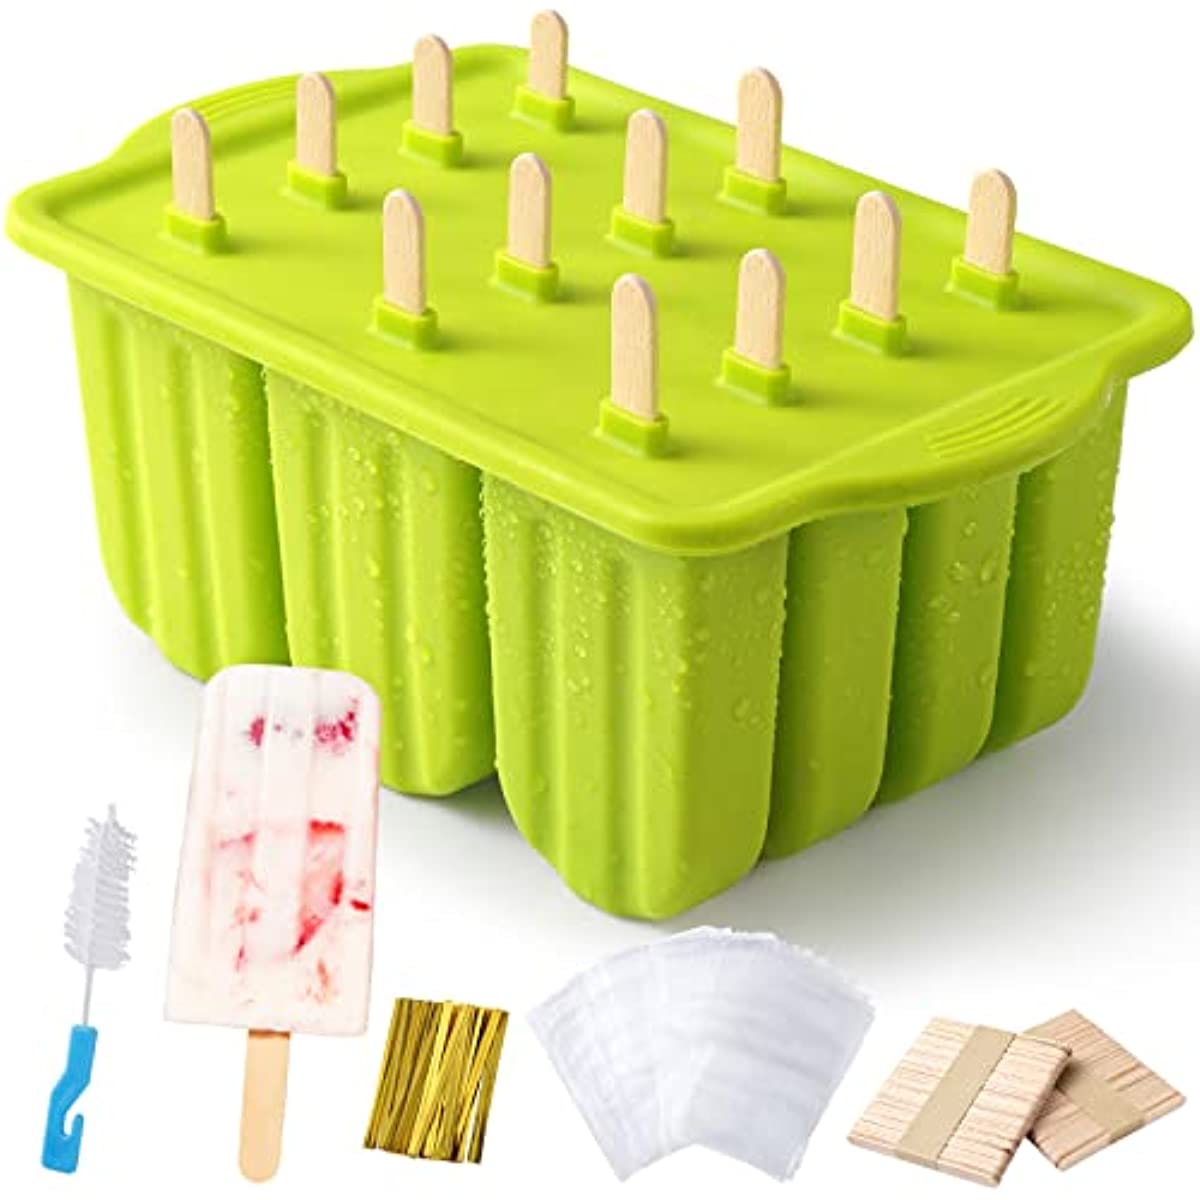 Ice Cream Ice Lolly Frozen Mold Silicone Lolly Pop Maker Mould Tray Home  made